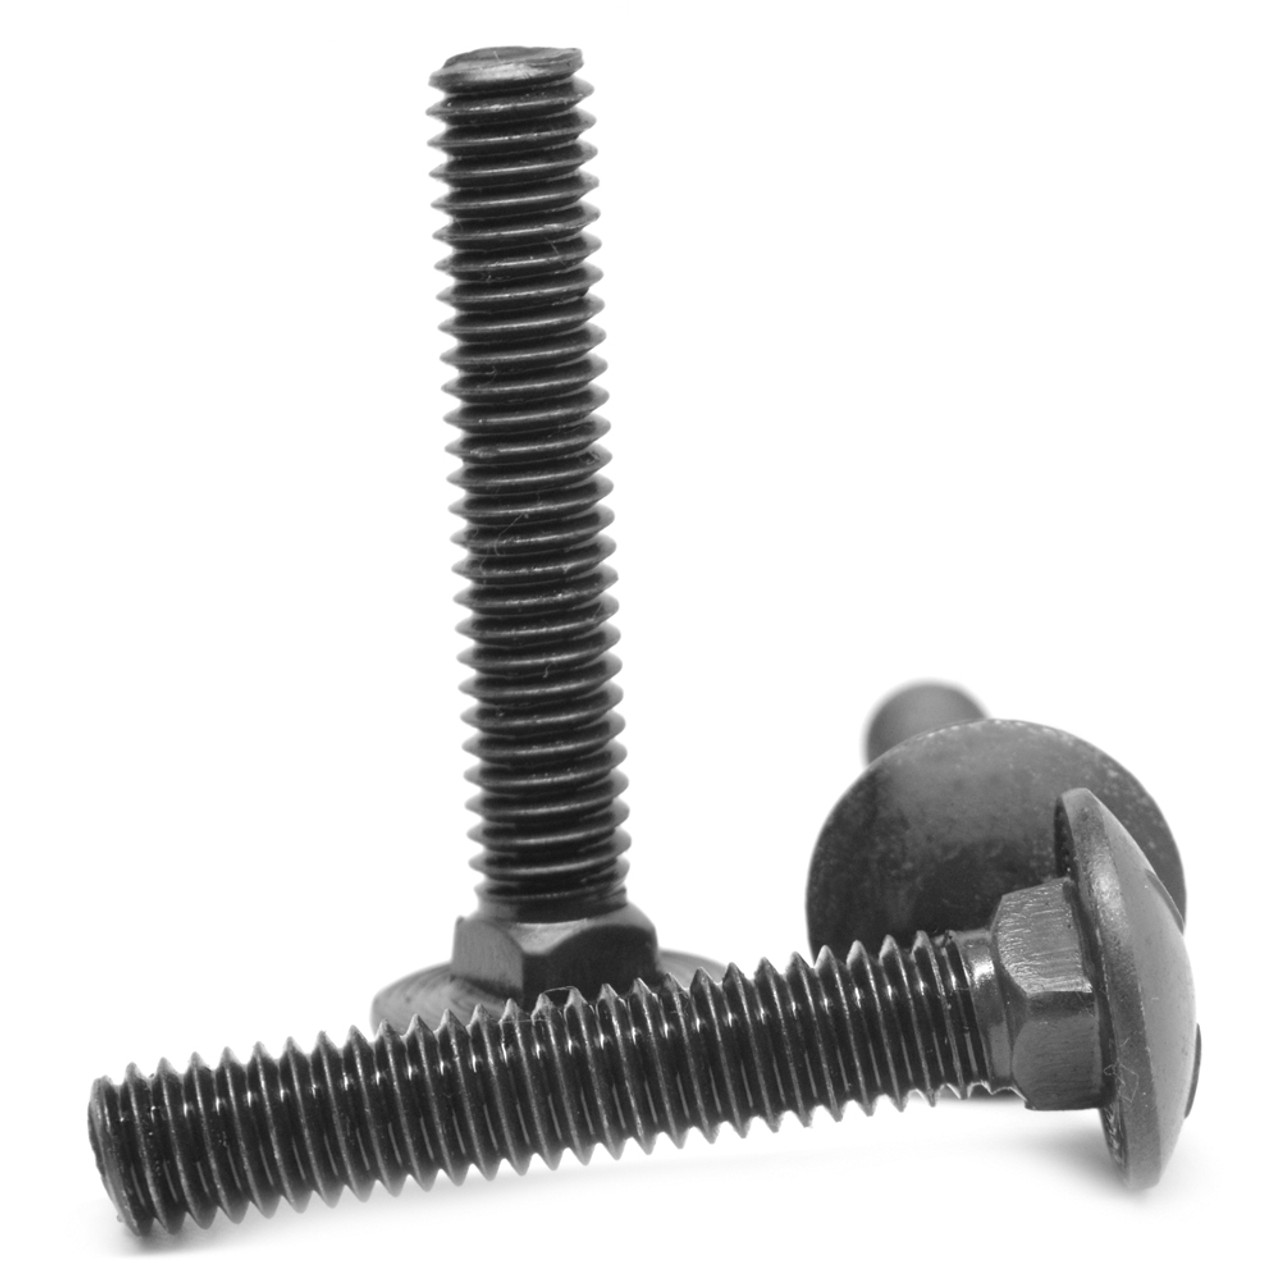 3/8-16 x 5 (FT) Coarse Thread Grade 8 Carriage Bolt Alloy Steel Thermal Black Oxide